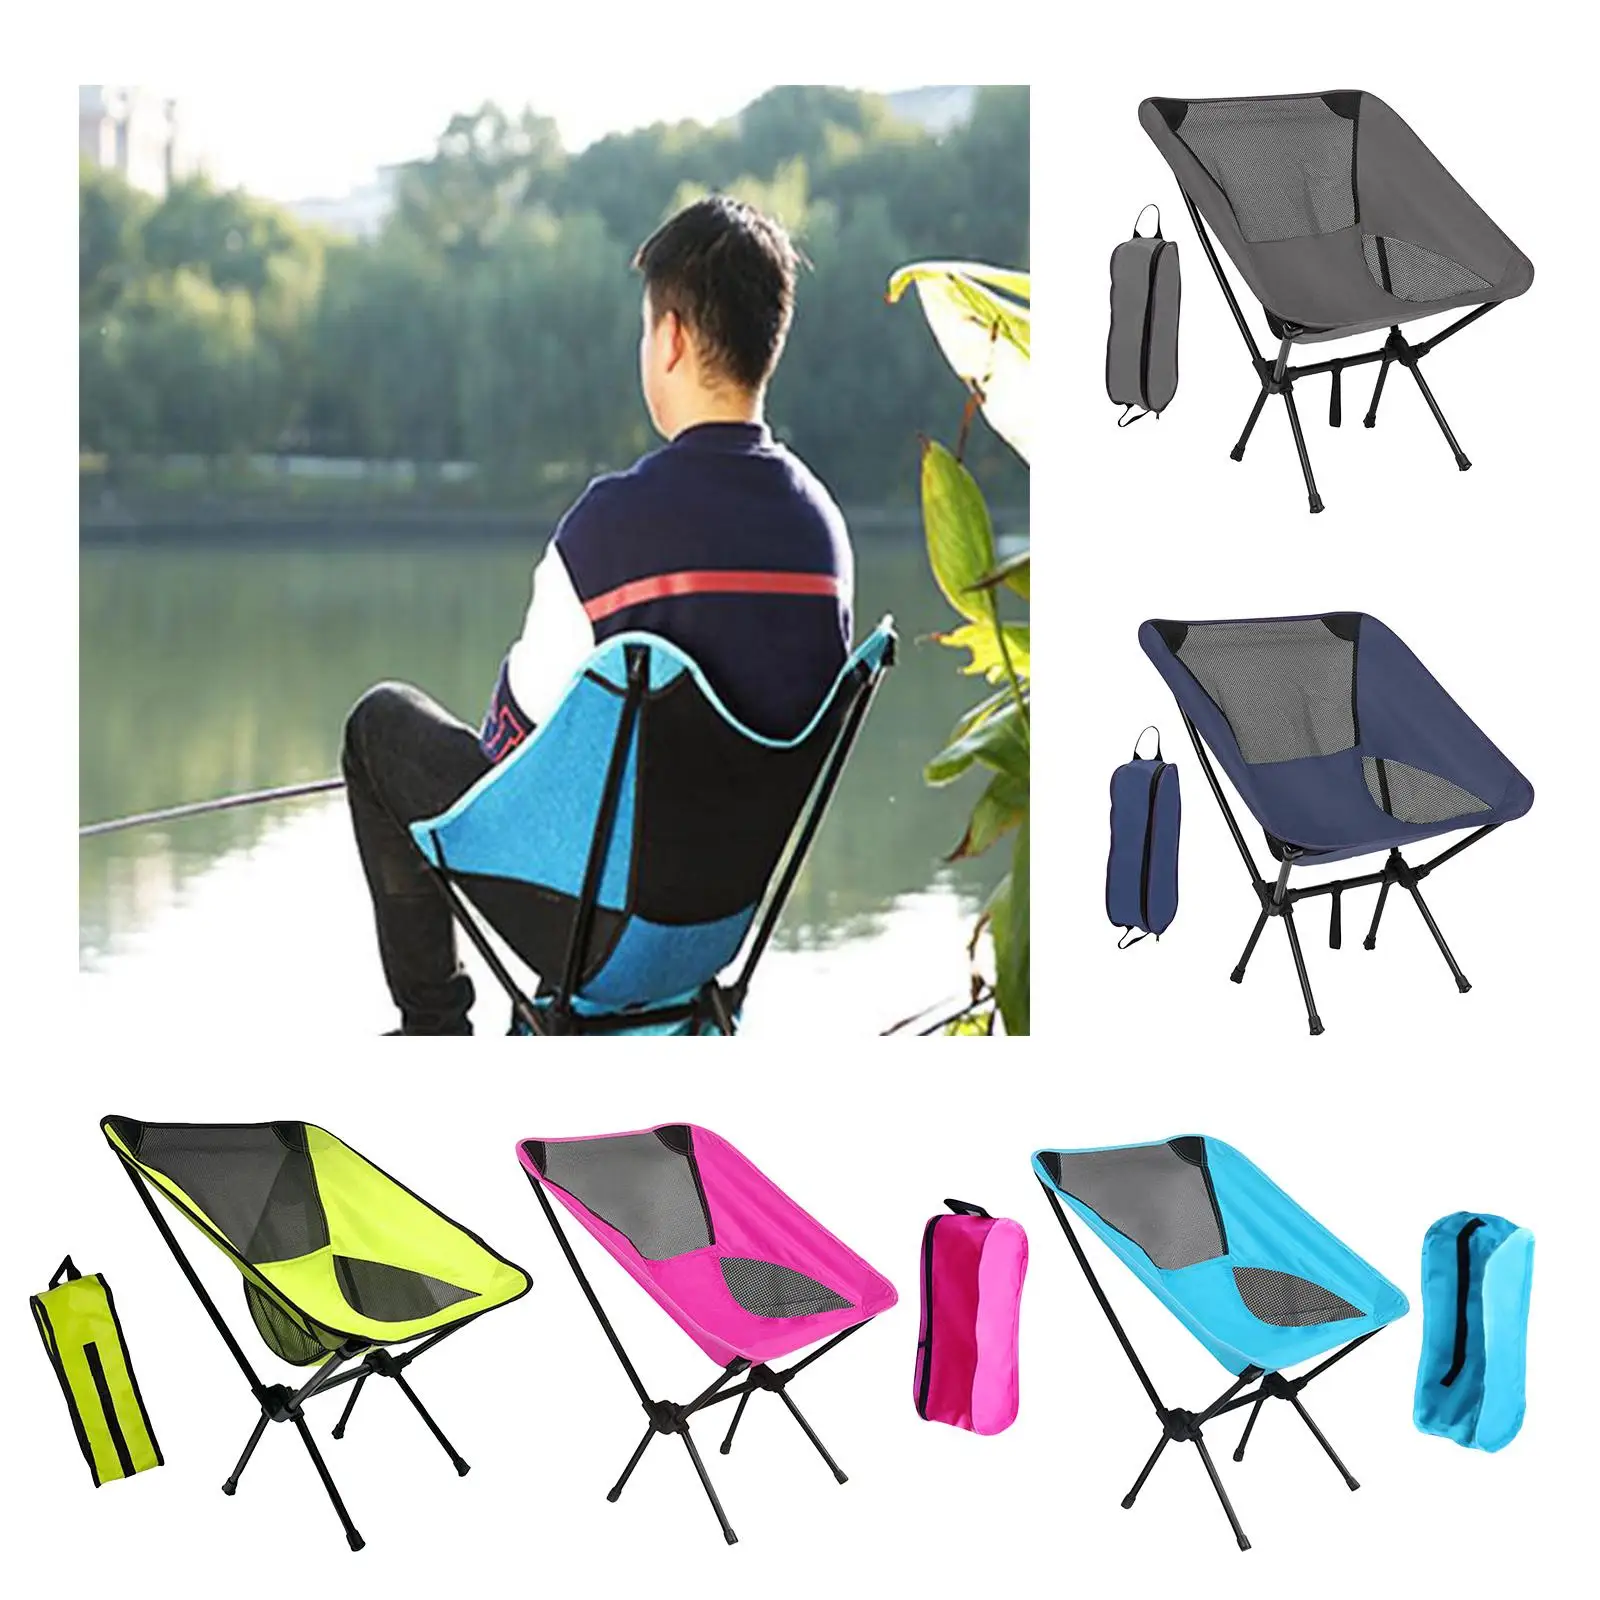 Portable Outdoor Hiking Camping Chair Folding Fishing Beach Seat, Durable Metal Tube Legs, Heavy Duty Oxford Canvas